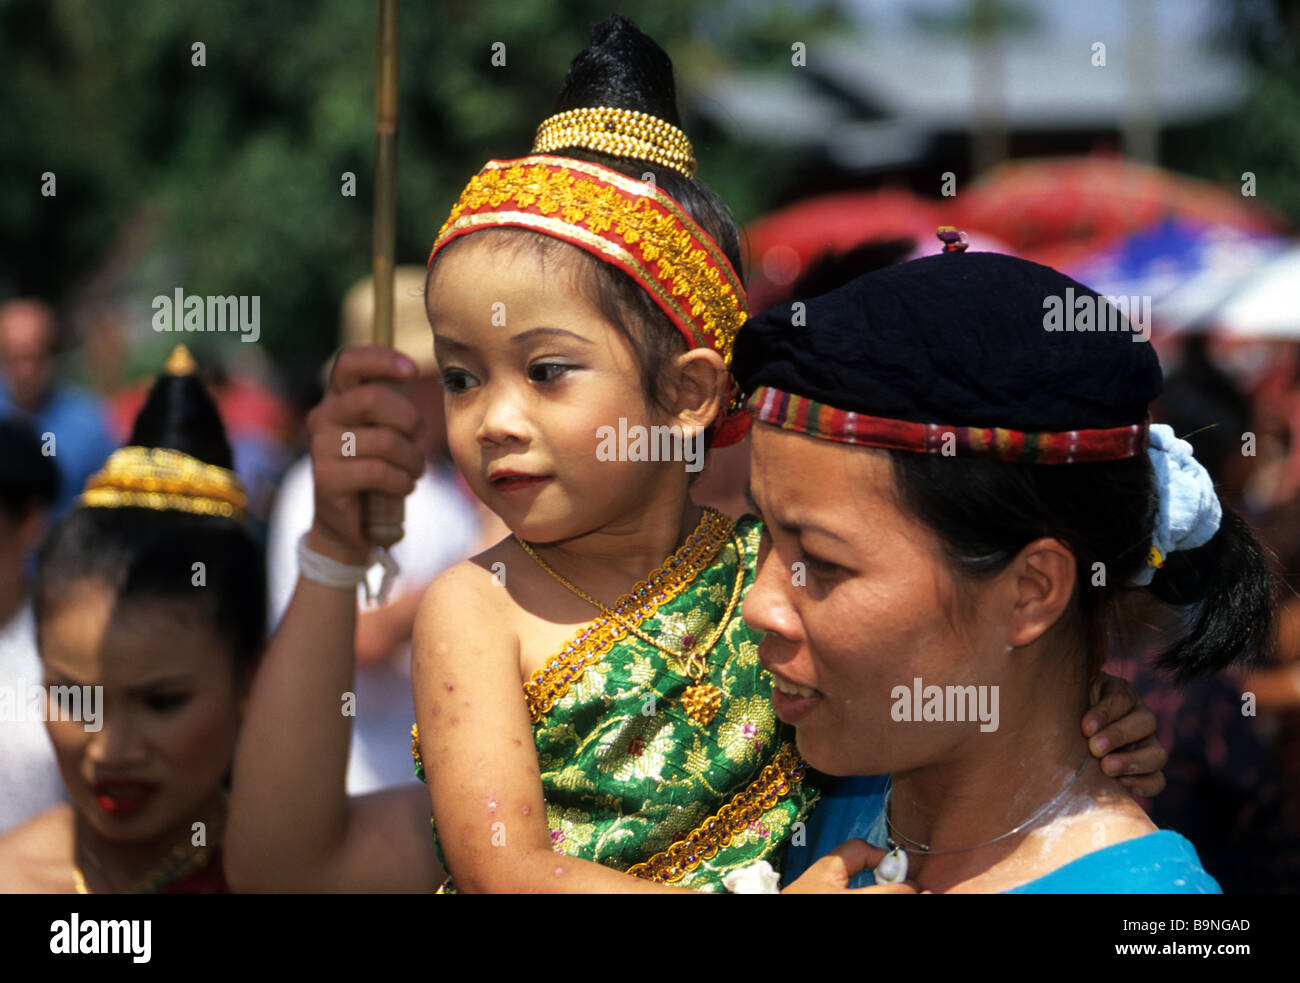 Young girl taking part in the children's beauty pageant, Phimai festival, Buddhist New Year, Luang Prabang, Laos. Stock Photo